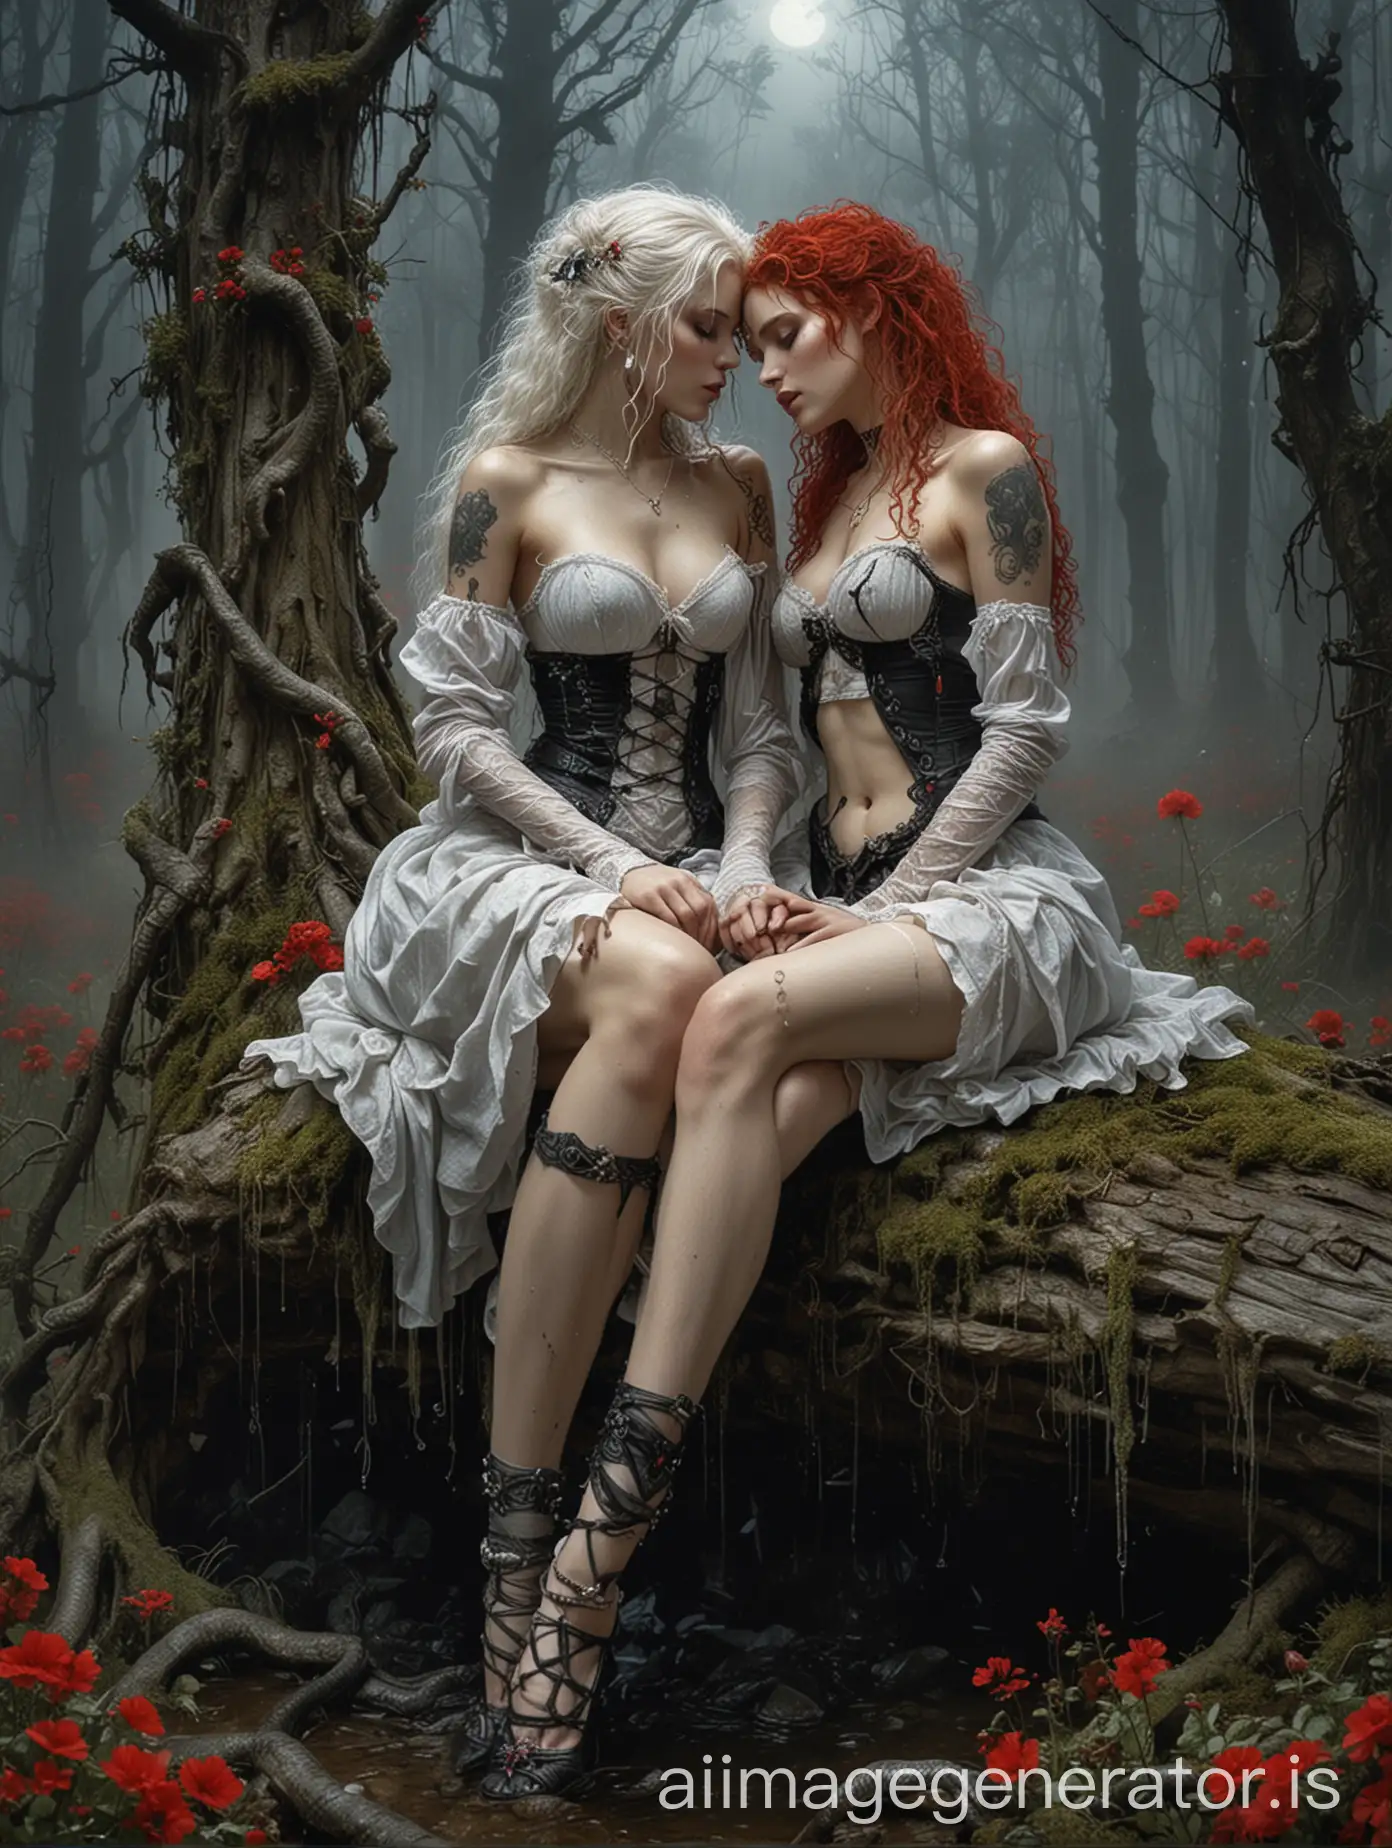 Intimate-Moment-of-Love-Women-in-Victorian-Lingerie-Embrace-in-Rainy-Forest